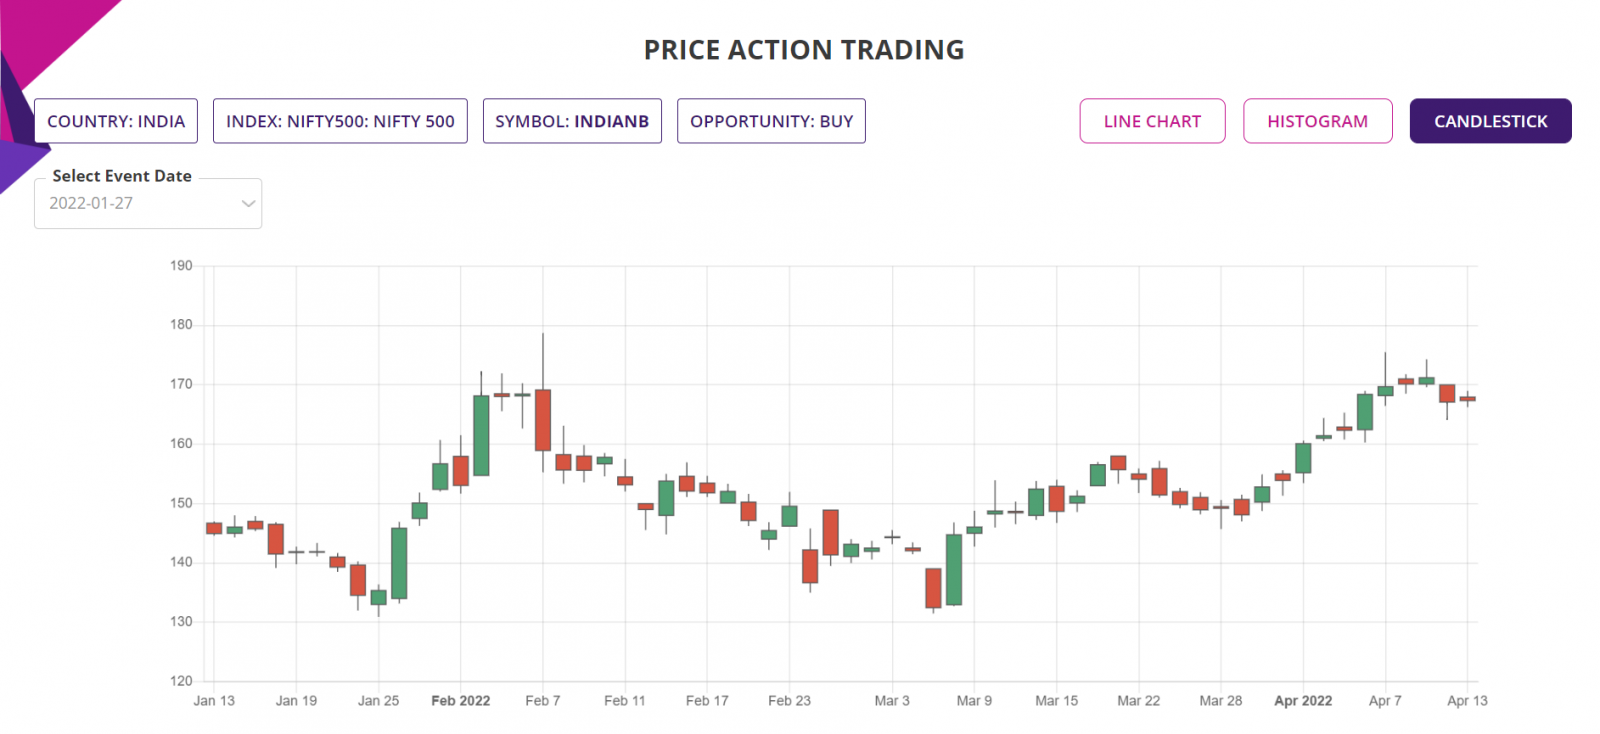 Price action trading strategy, detailed report charts, candlestick chart, Indian stock market